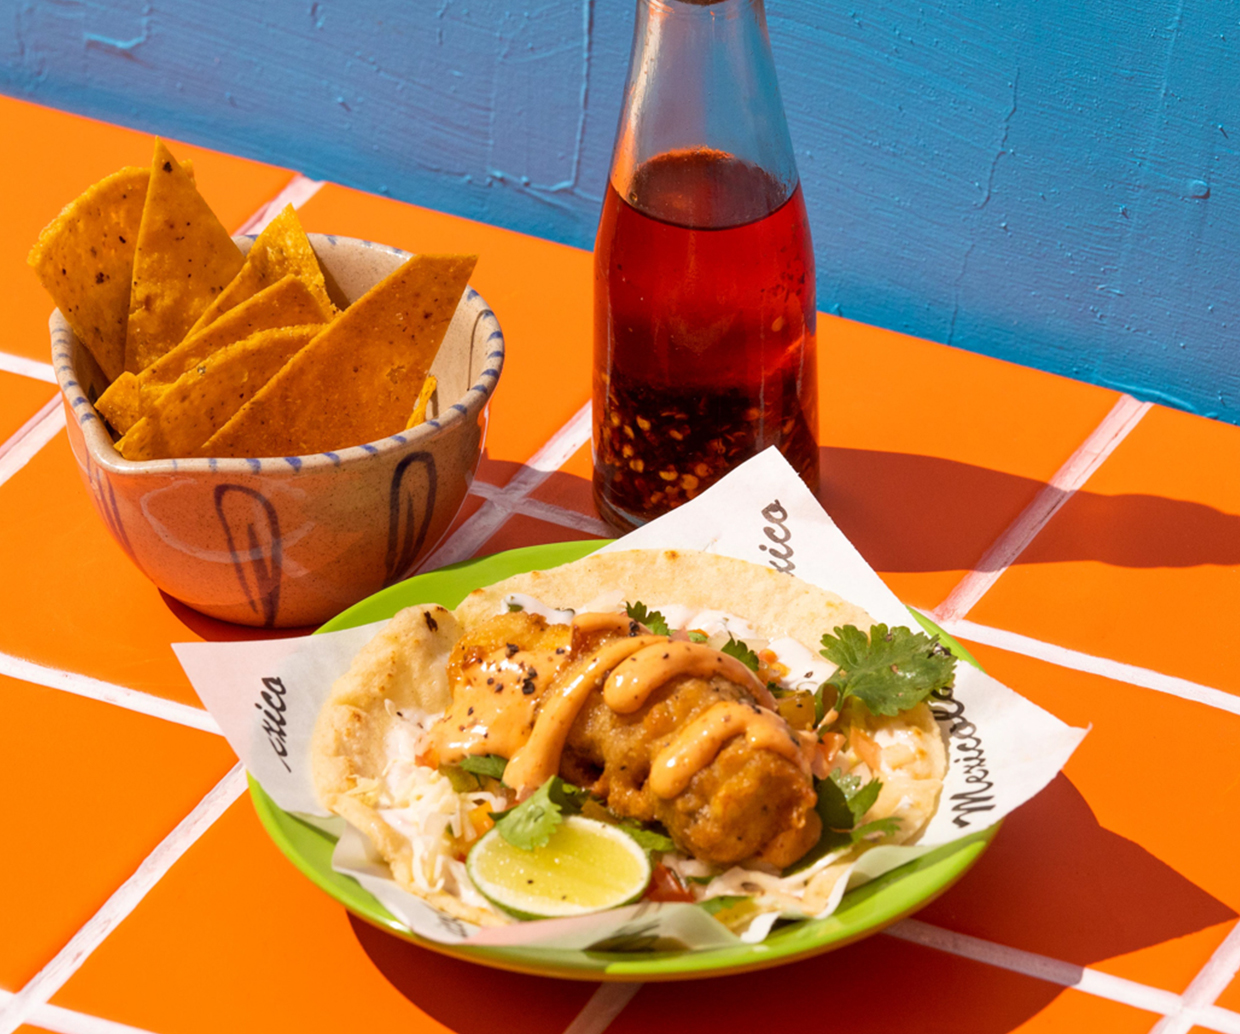 tacos and chips on tiled table with sangrita bottle